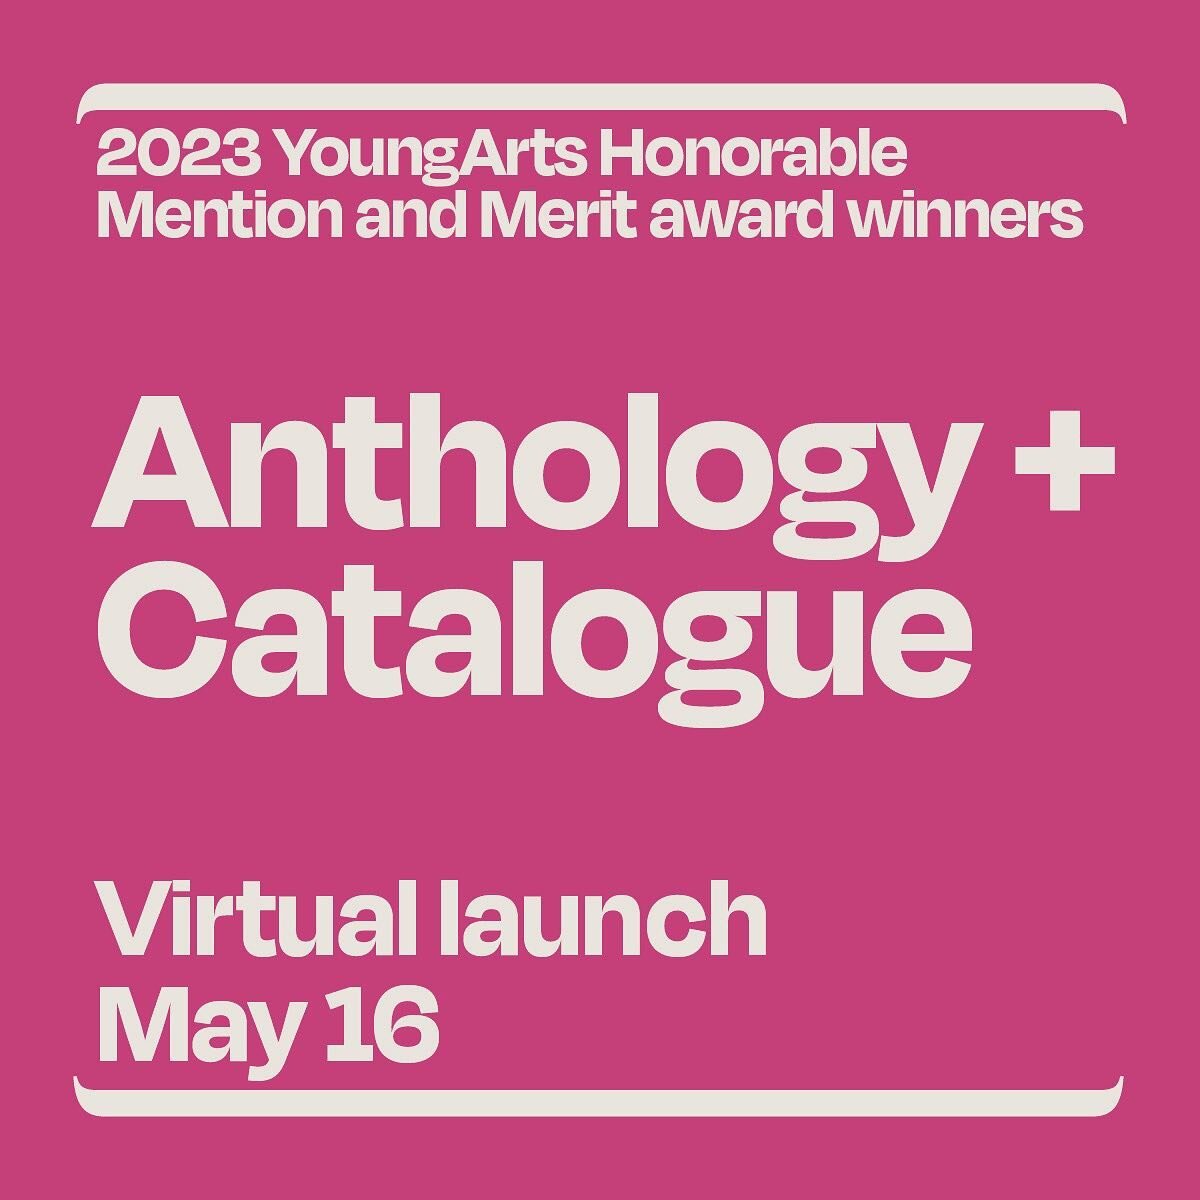 I&rsquo;m a 2023 YoungArts winner in Writing! My piece, &ldquo;Written On The Bathroom Wall&rdquo; will be featured in the 2023 YoungArts Merit &amp; Honorable Mention Anthology + Catalogue. Join me on May 16 at 7:30PM ET for the Anthology + Catalogu